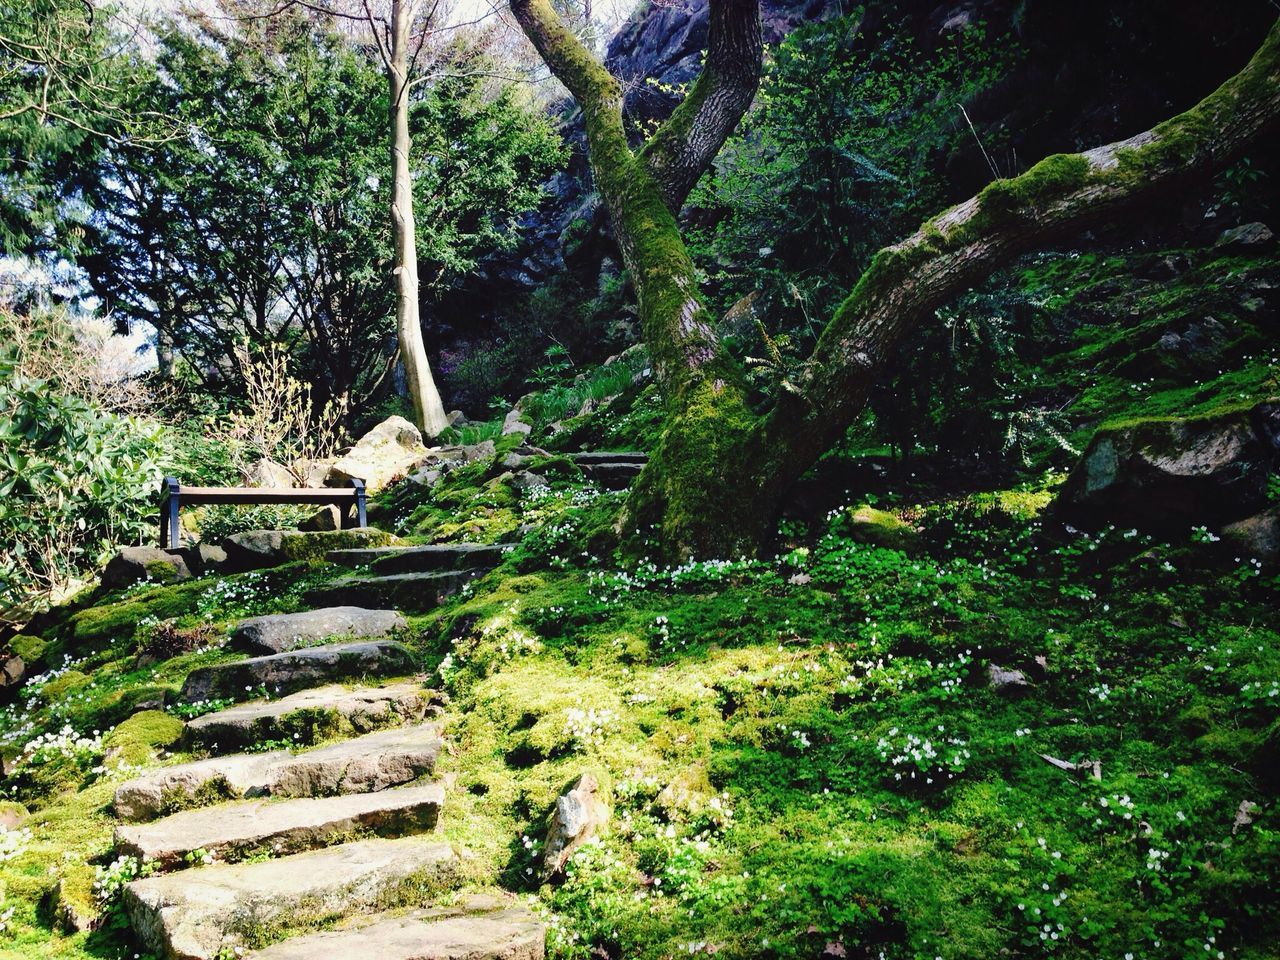 tree, growth, green color, steps, forest, plant, tranquility, nature, tranquil scene, steps and staircases, tree trunk, beauty in nature, lush foliage, staircase, wood - material, park - man made space, moss, day, outdoors, scenics